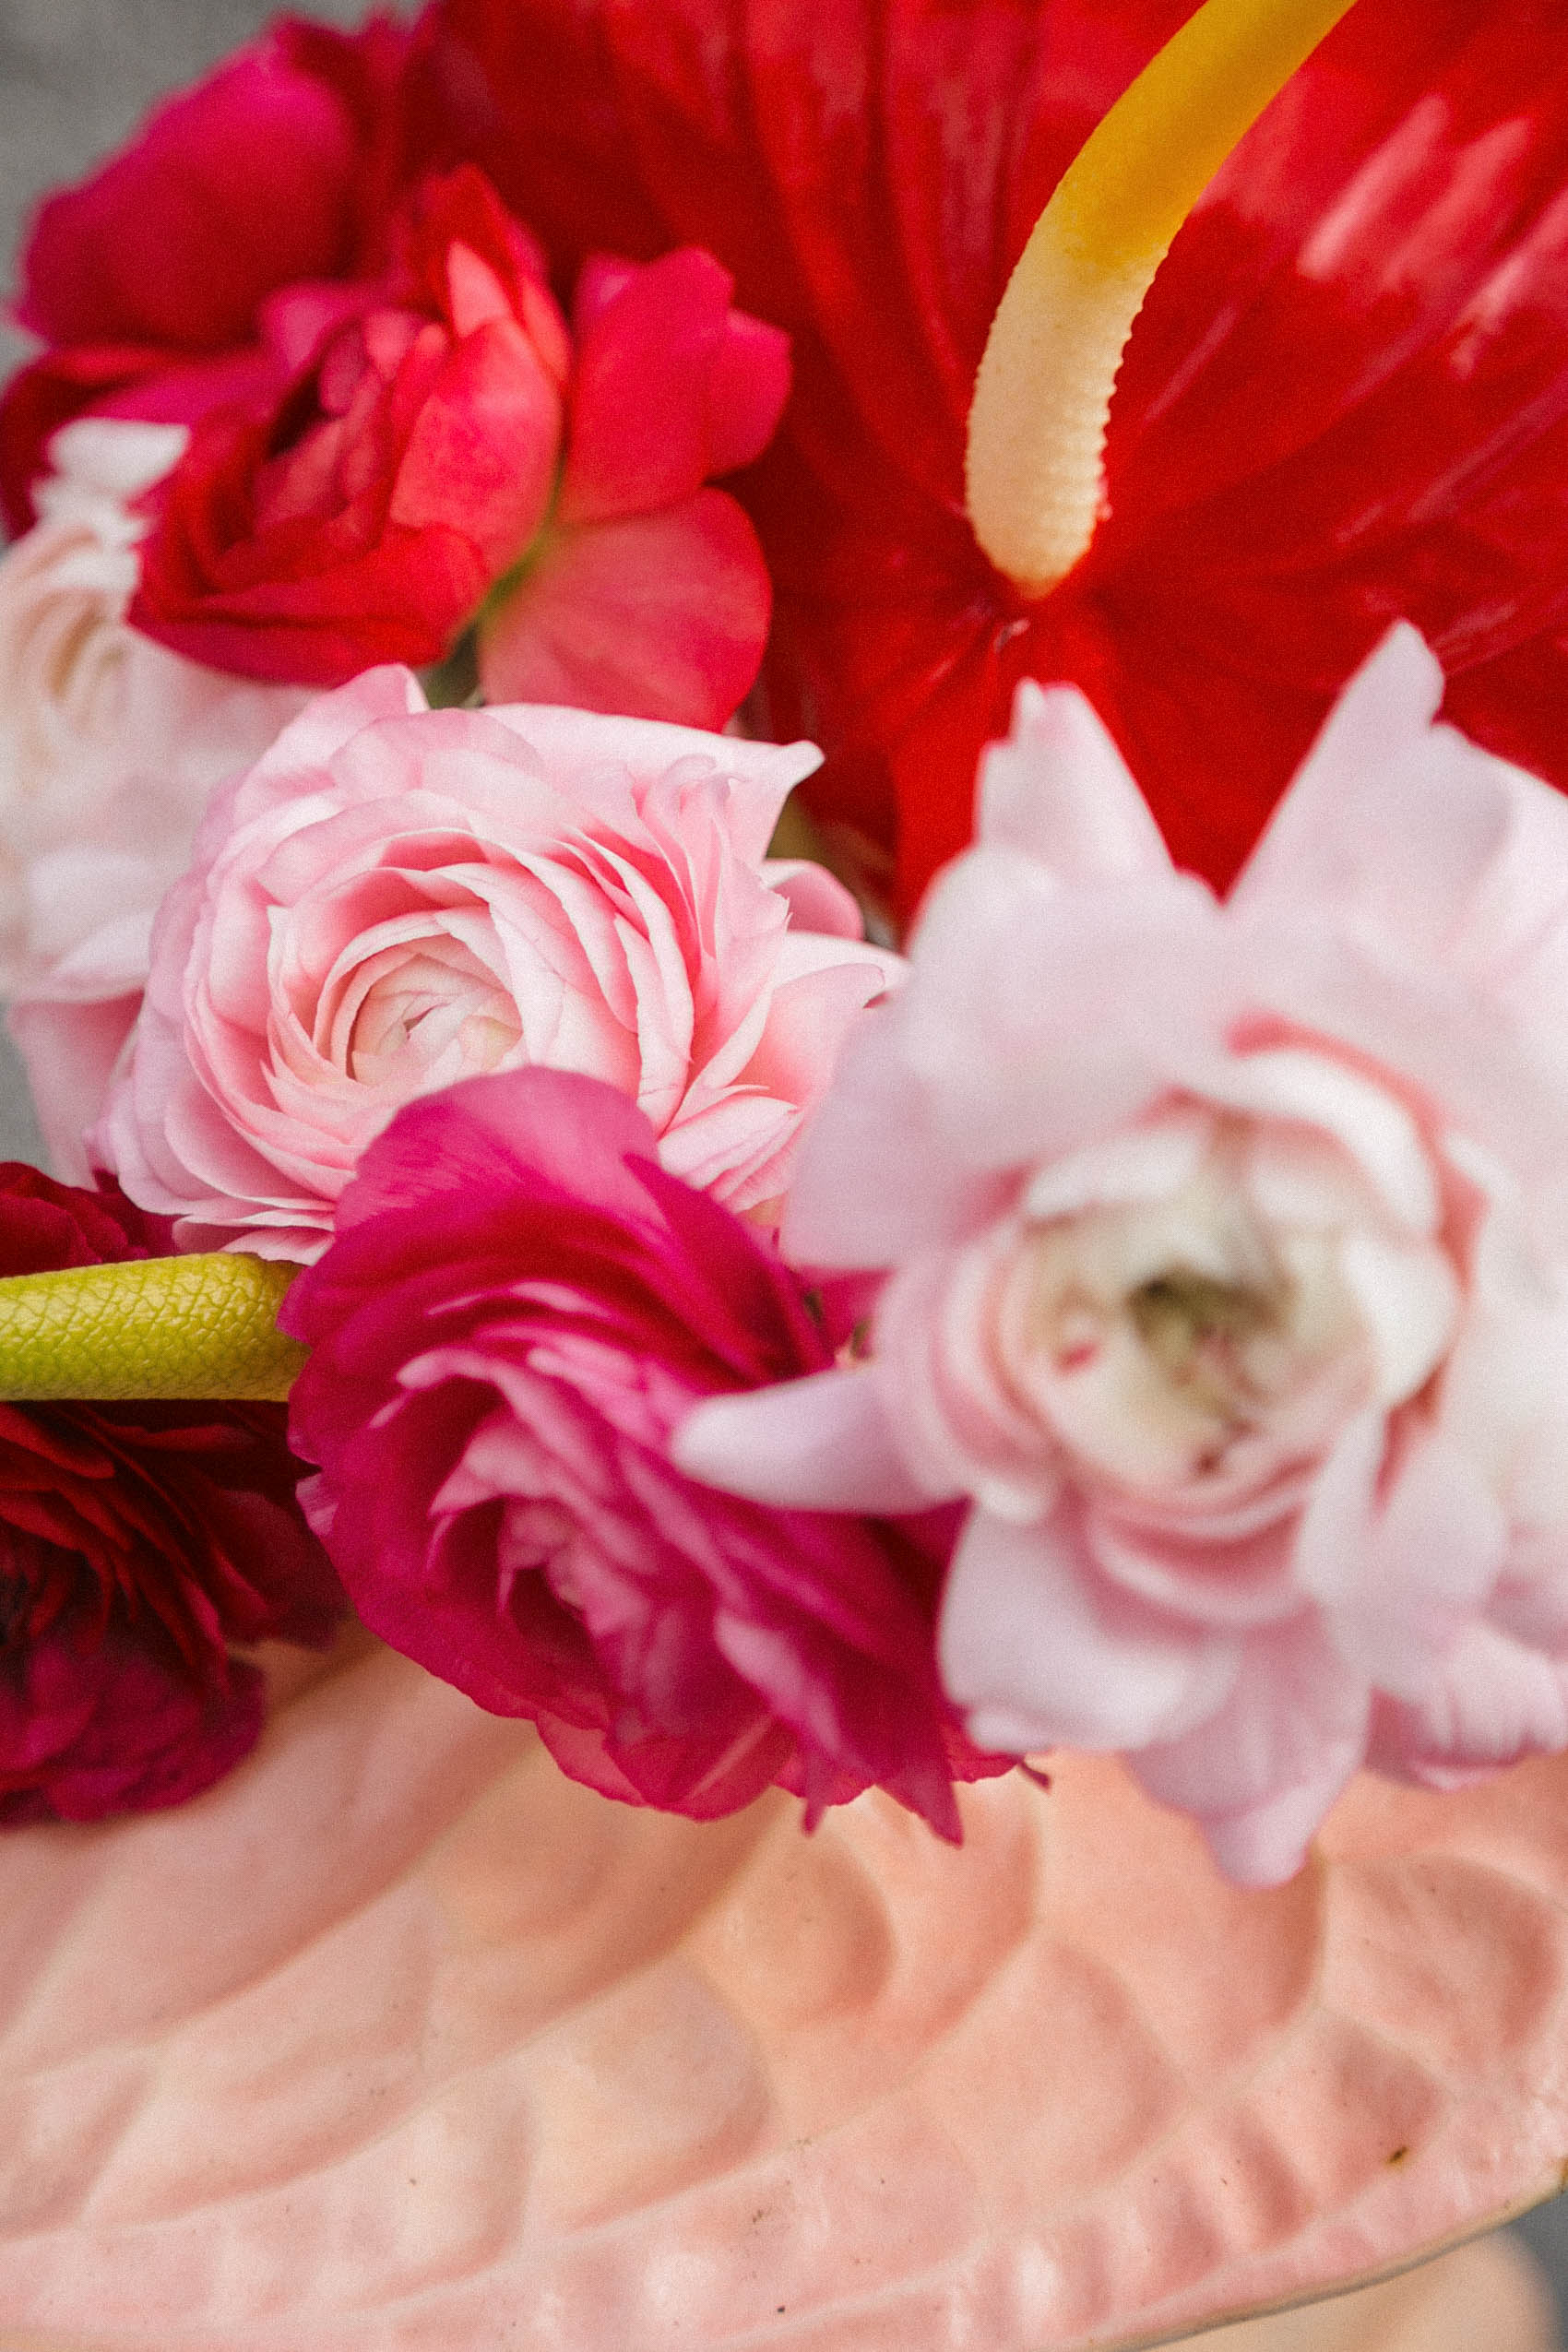 Ranunculus and anthurium flowers in pinks and reds